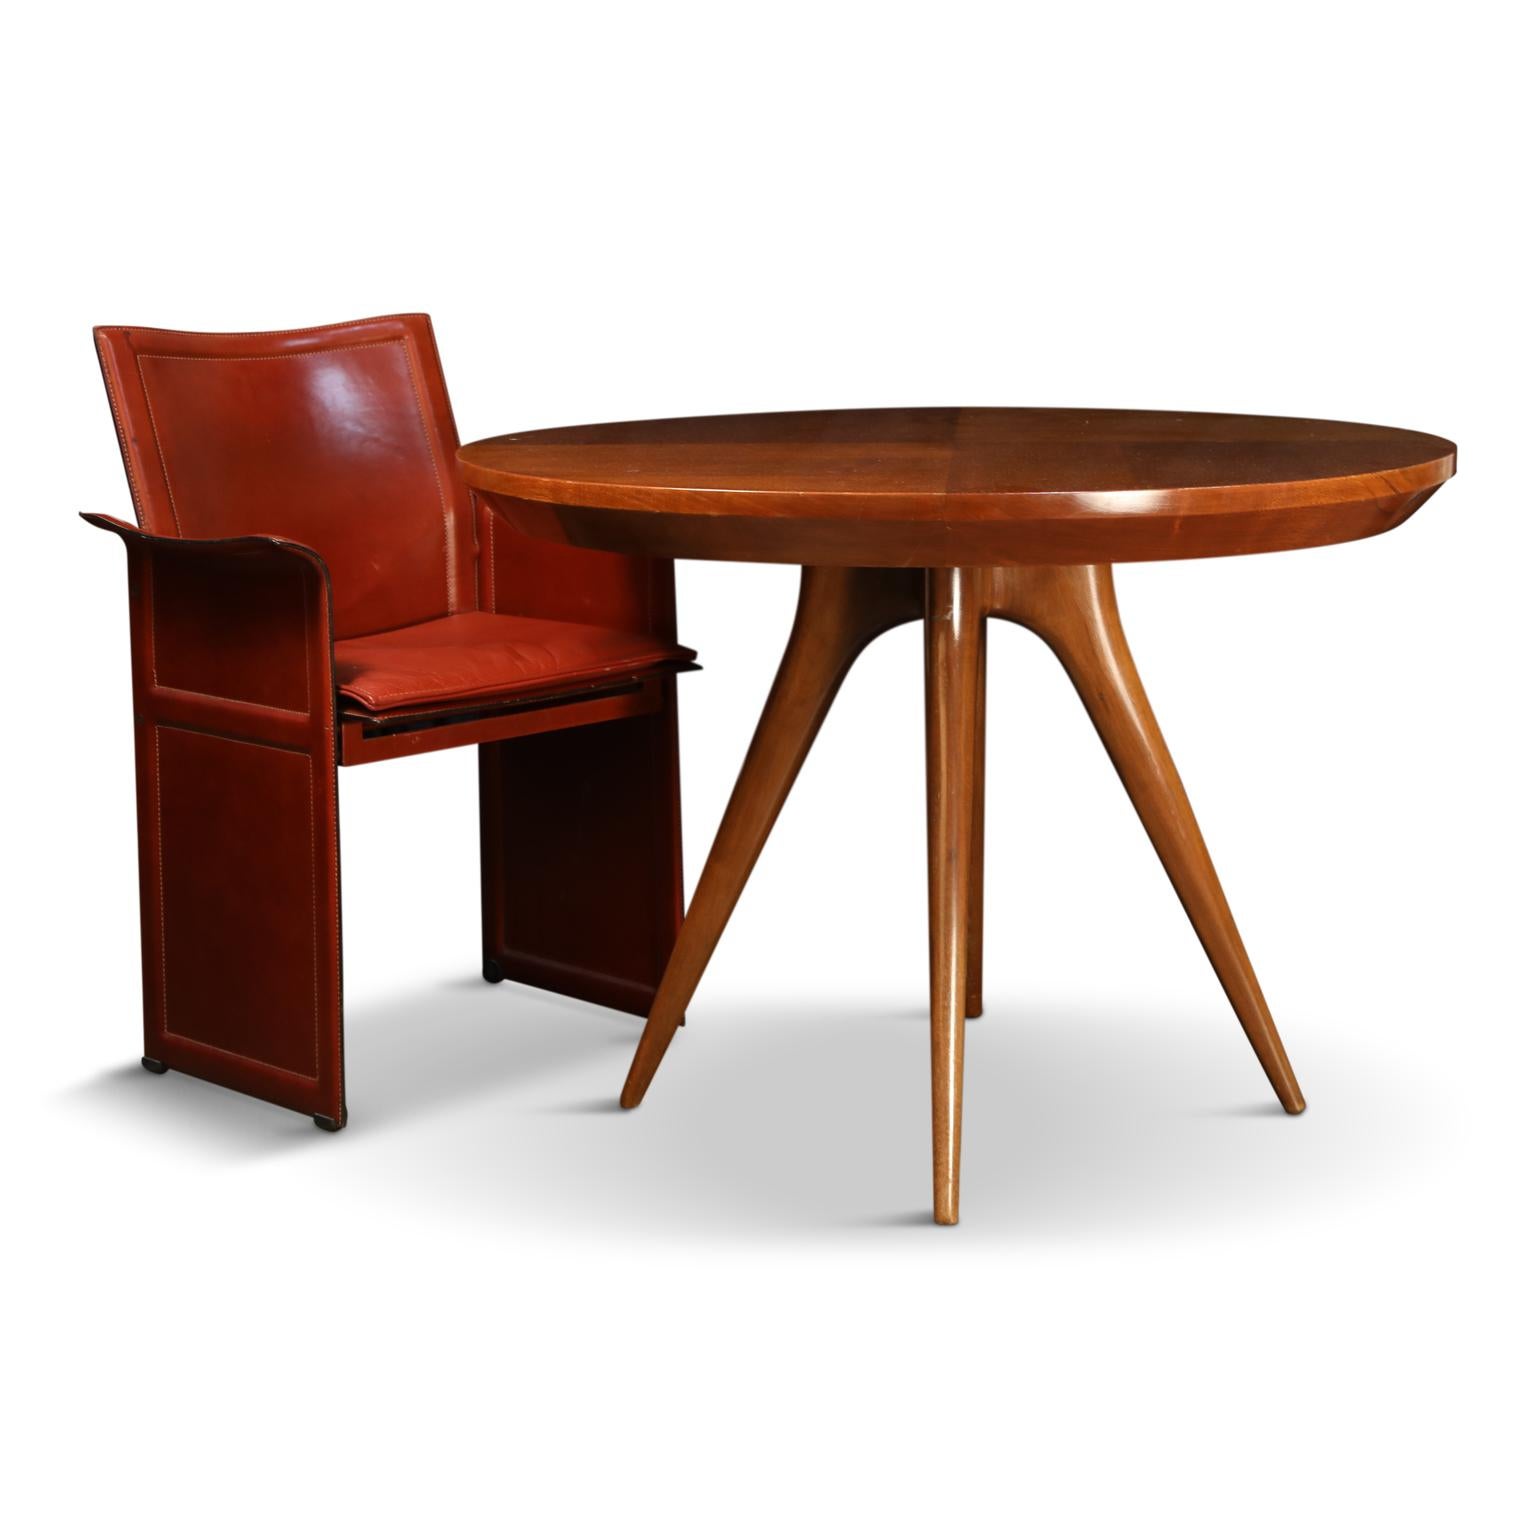 Reminiscent of his earlier work with Kagan-Dreyfuss, this gorgeous Vladimir Kagan sculpted leg dining table (or also an amazing choice as a breakfast, center, or game table) was custom produced for a family friend of his in 1998. Sharing similarity